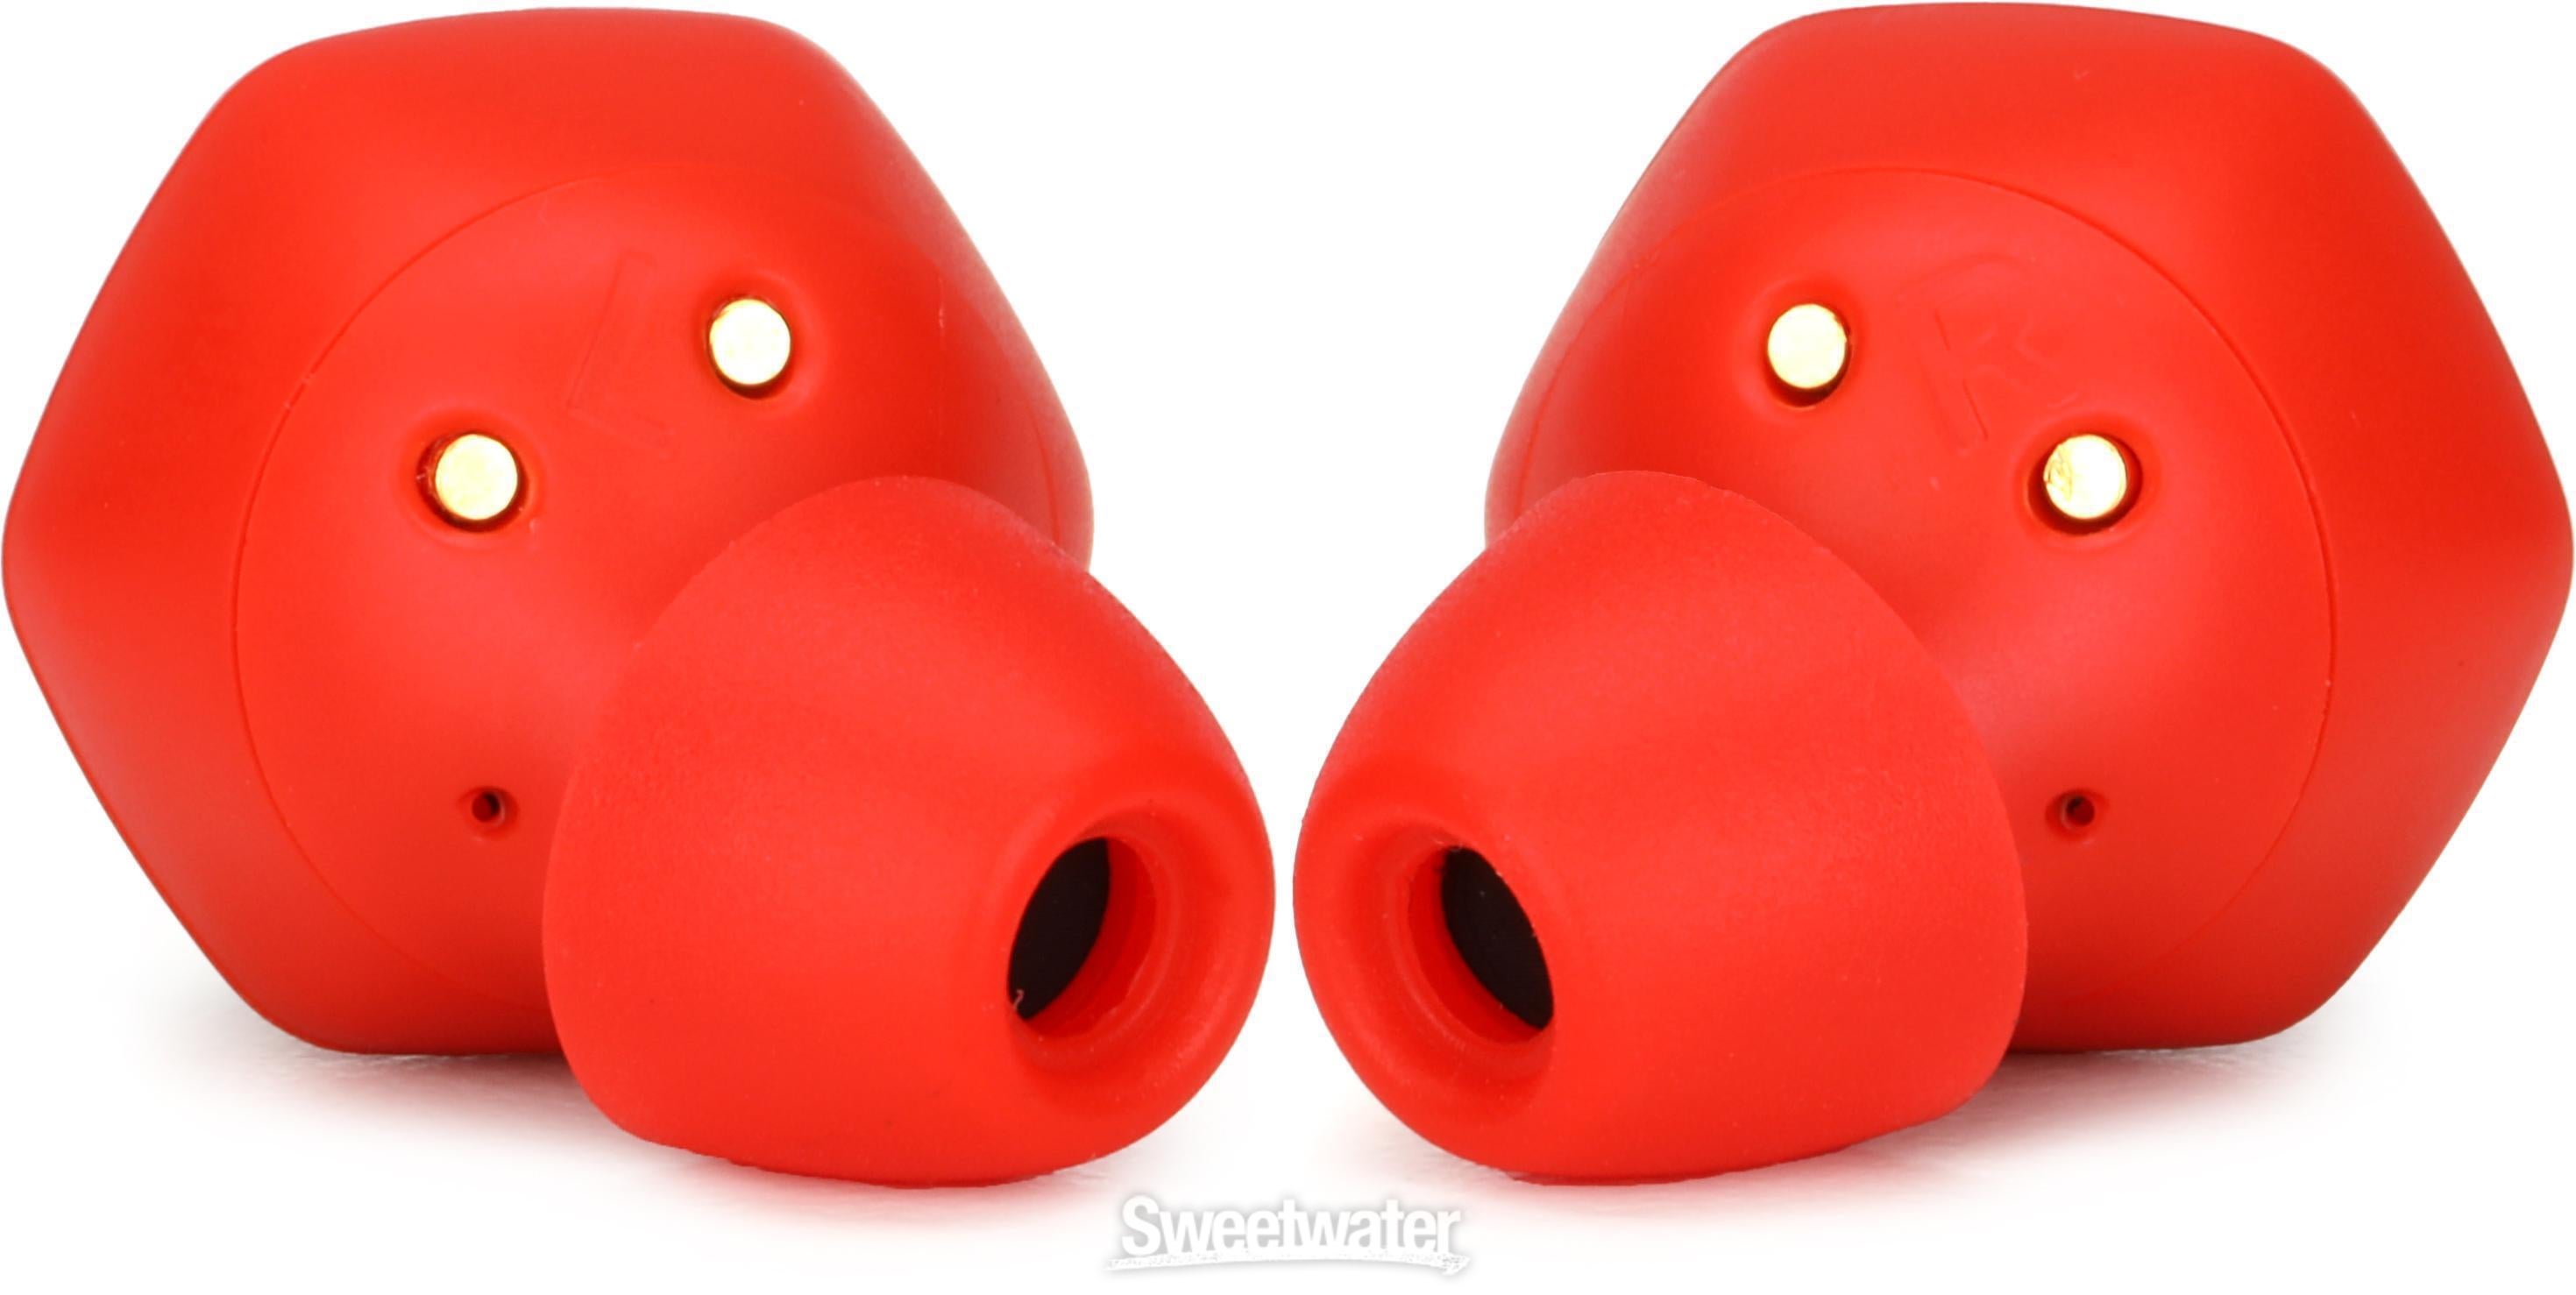 V-Moda Hexamove Lite Wireless Earbuds - Red | Sweetwater